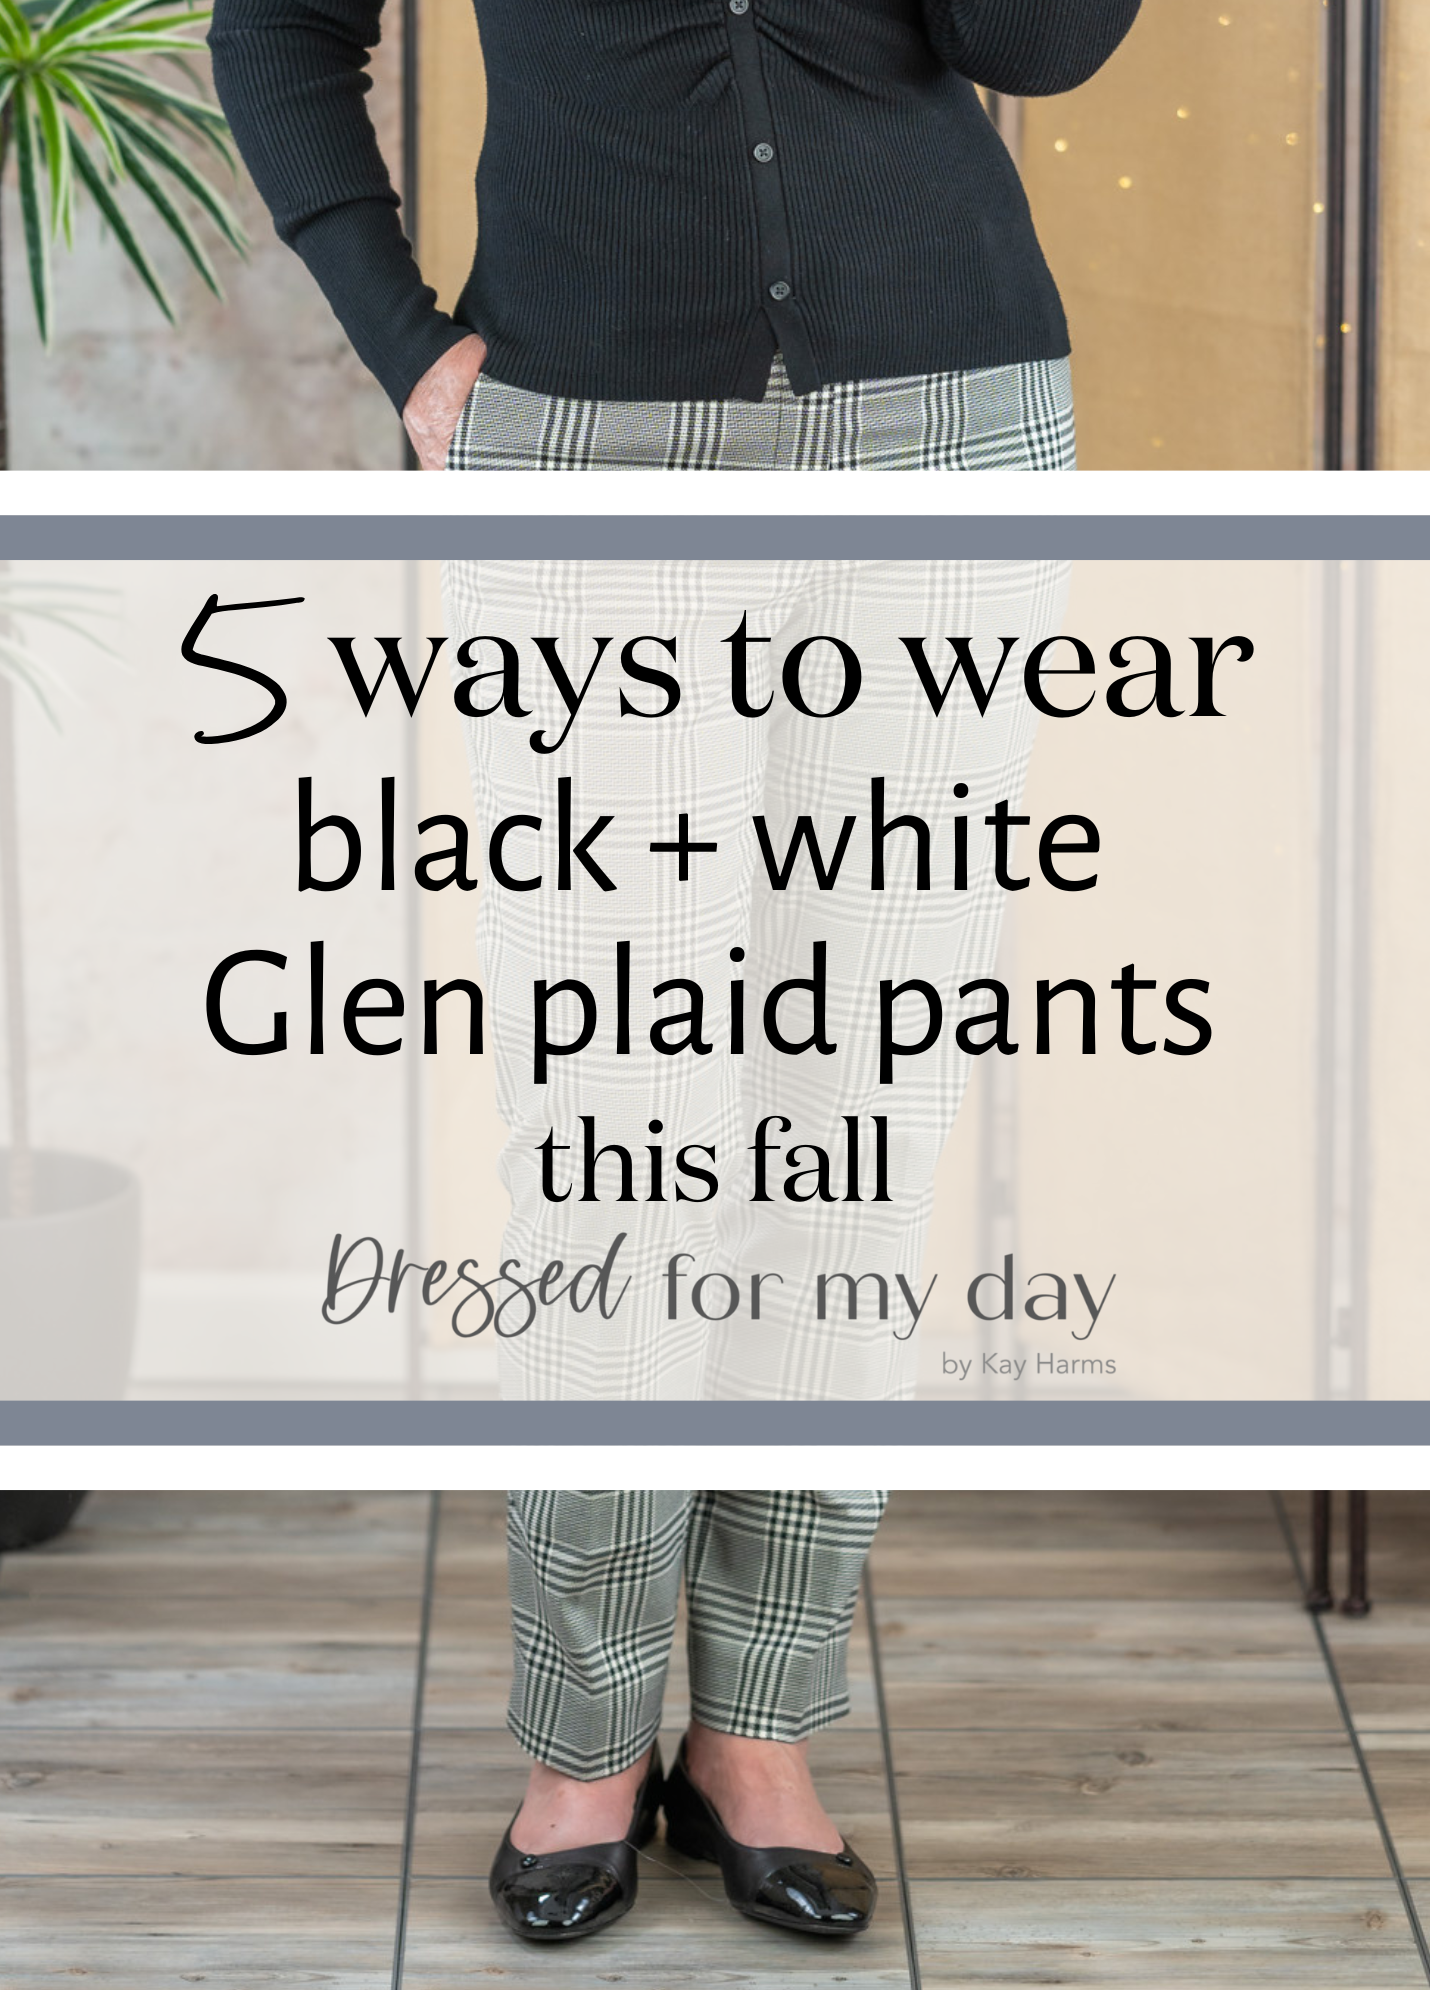 5 Ways to wear black and white glen plaid pants this fall